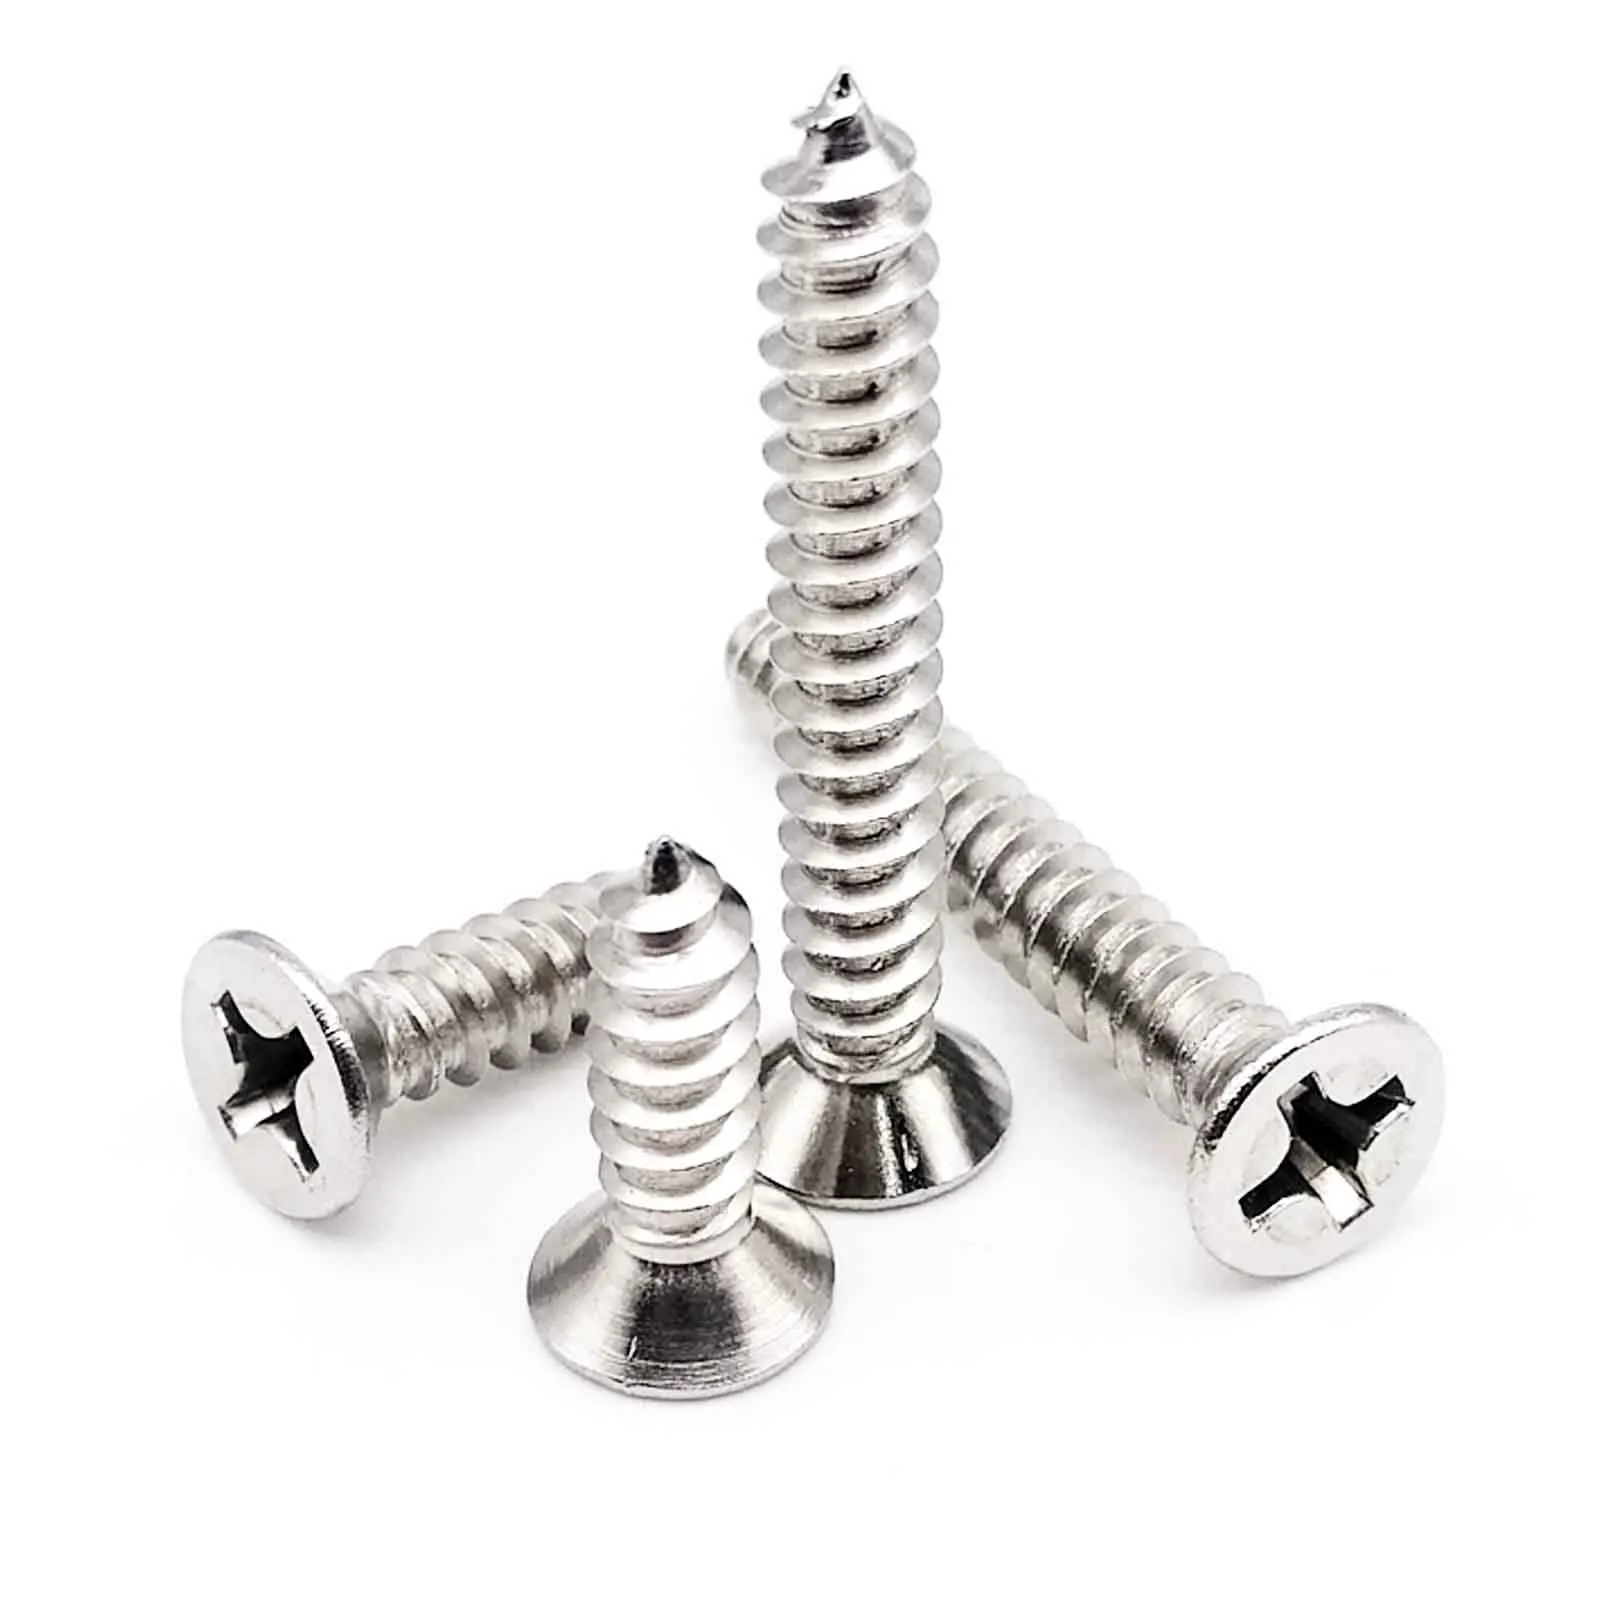 

M1 M1.2 M1.4 M1.7 M2 M2.6 M3 M3.5 M4 M5 M6 Mini 304 stainless steel Cross Phillips Flat Countersunk Head Self-tapping Wood Screw